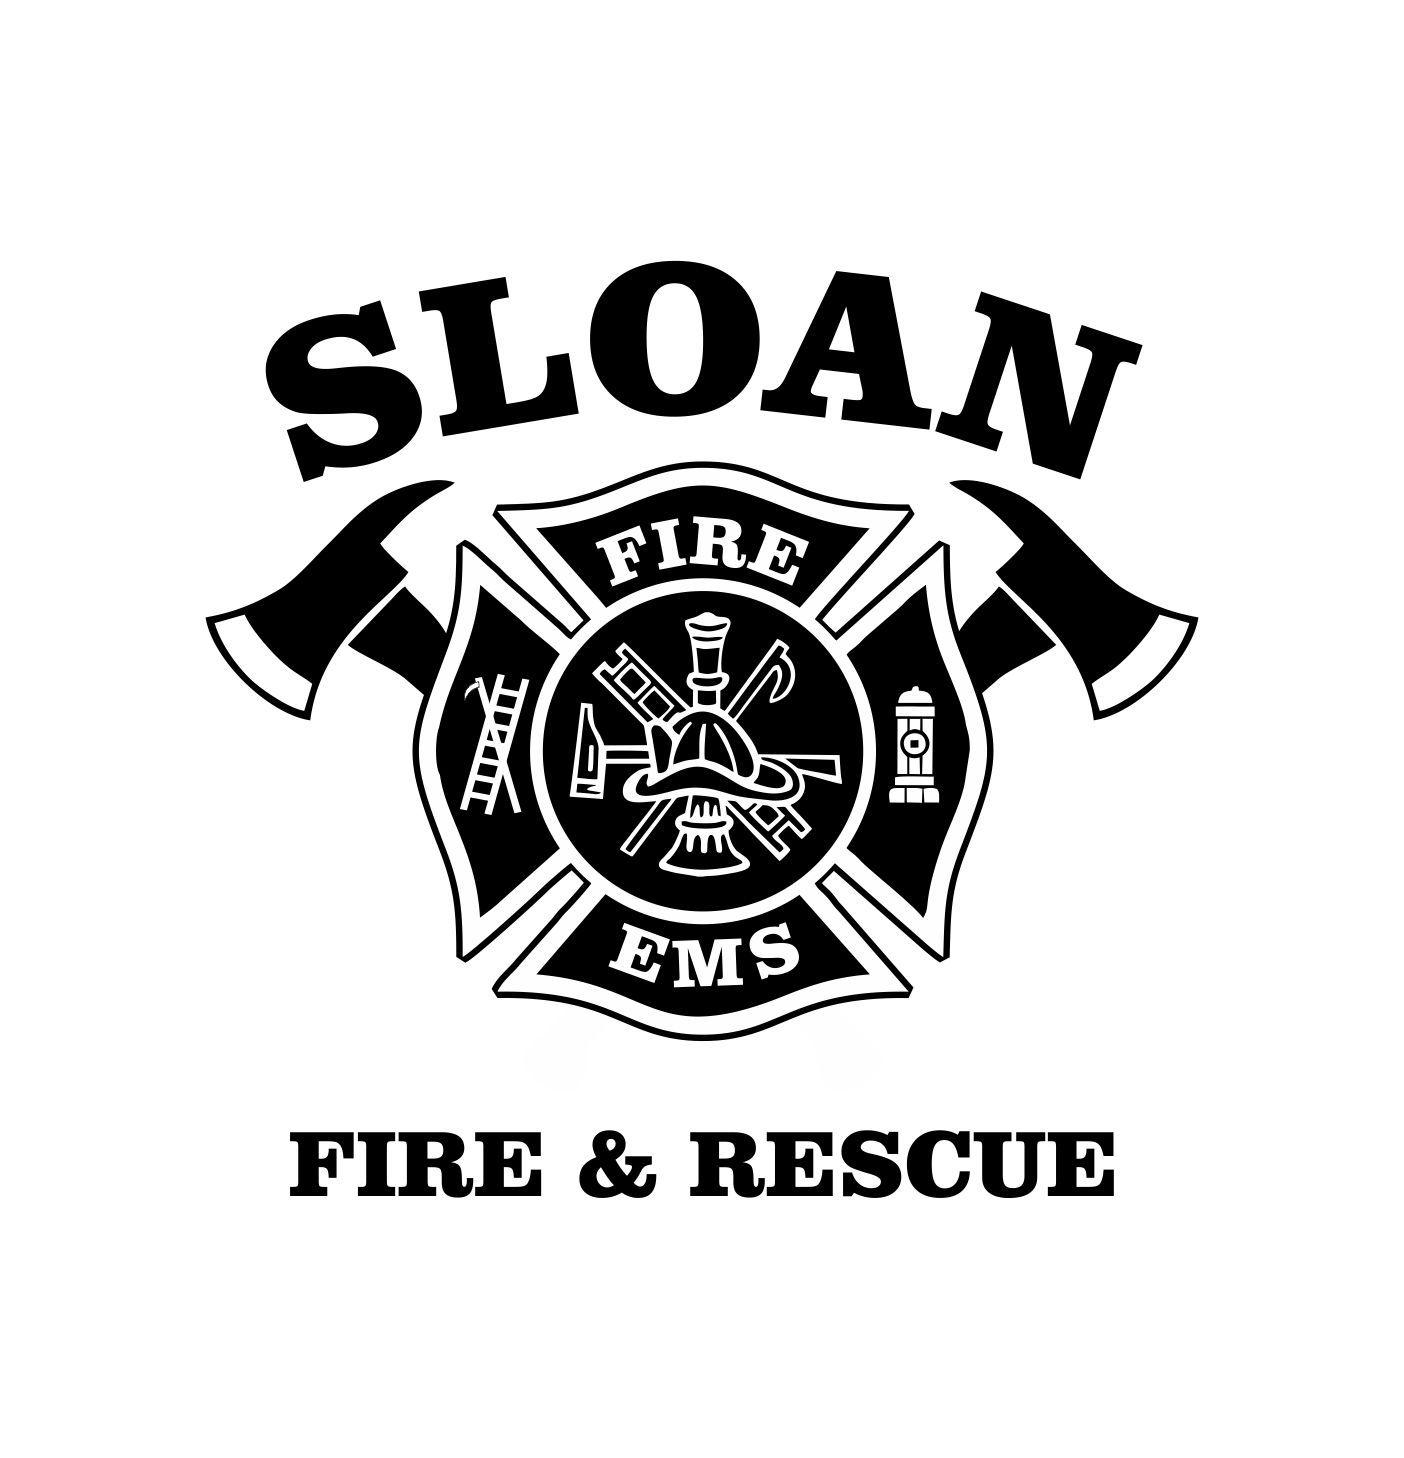 Wall of Fame Logo - Sloan Fire Department. Wall of Fame